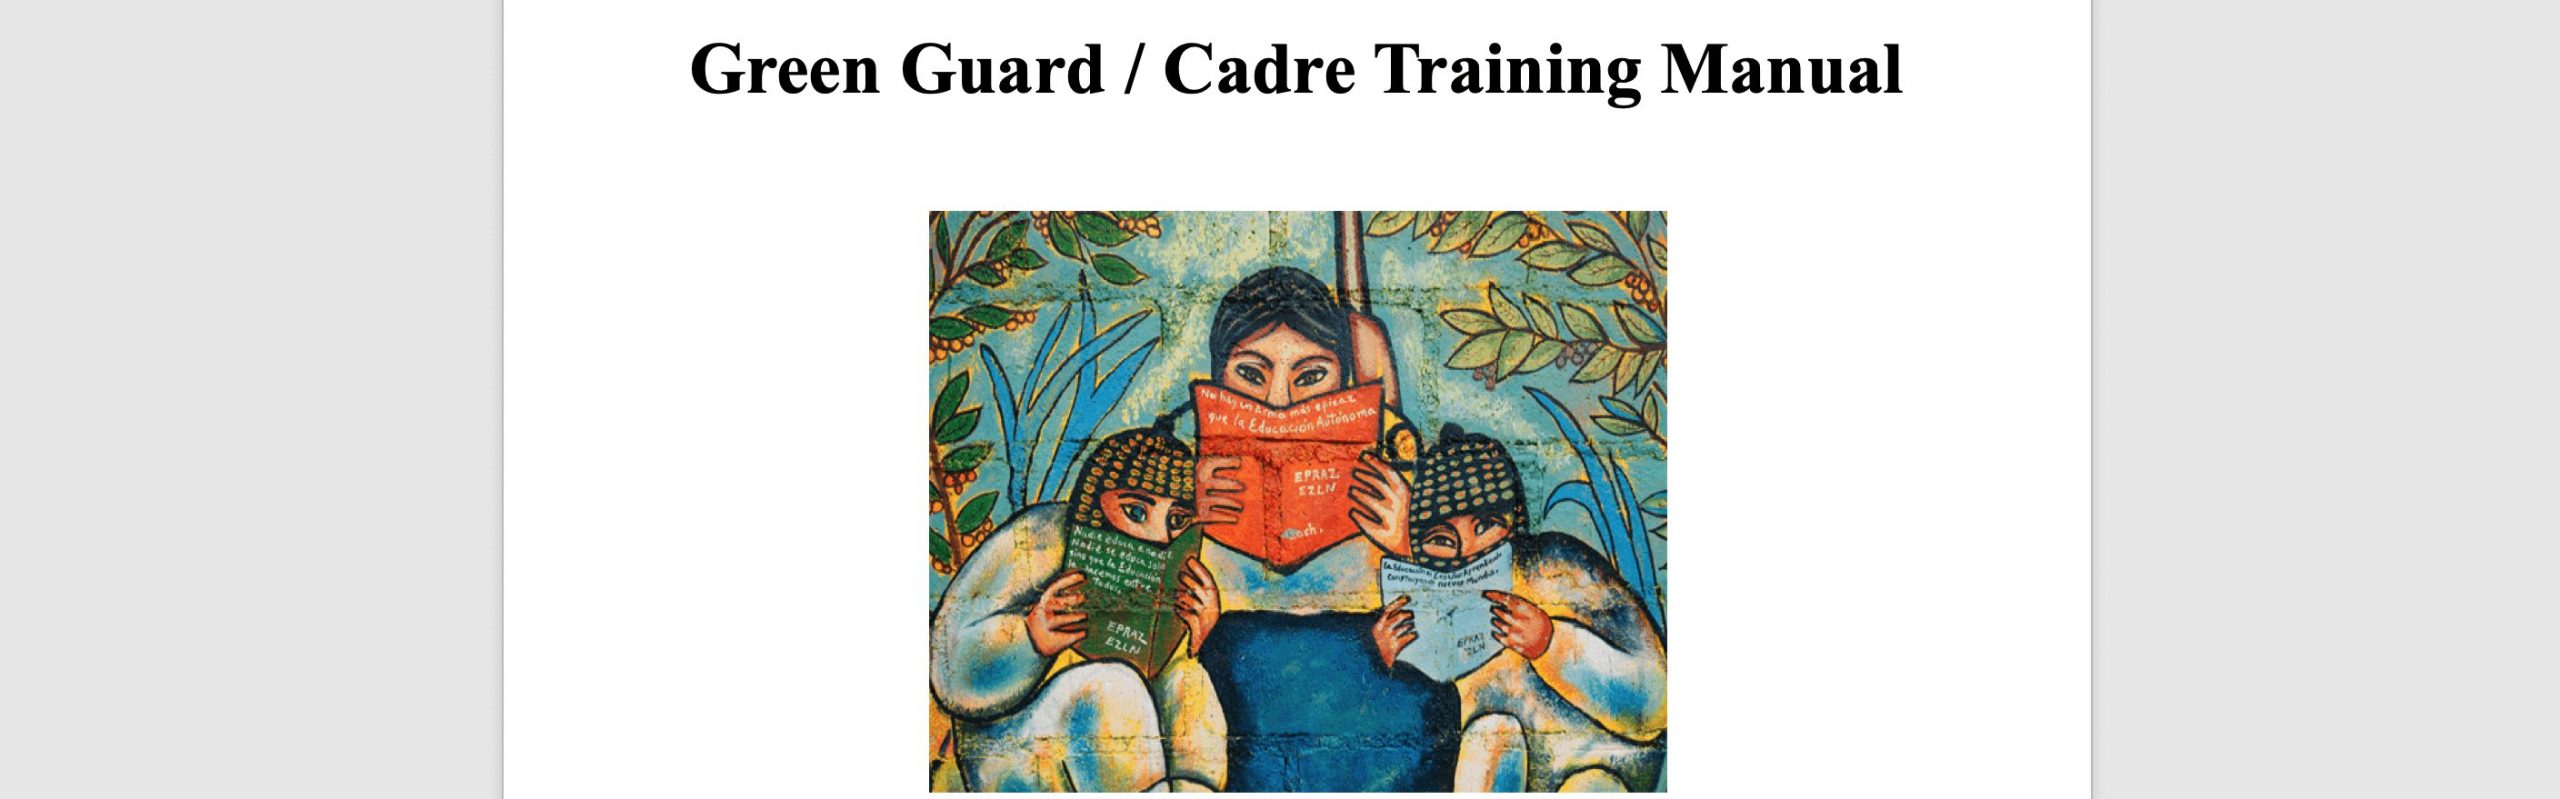 image showing "green guard / cadre training manual"